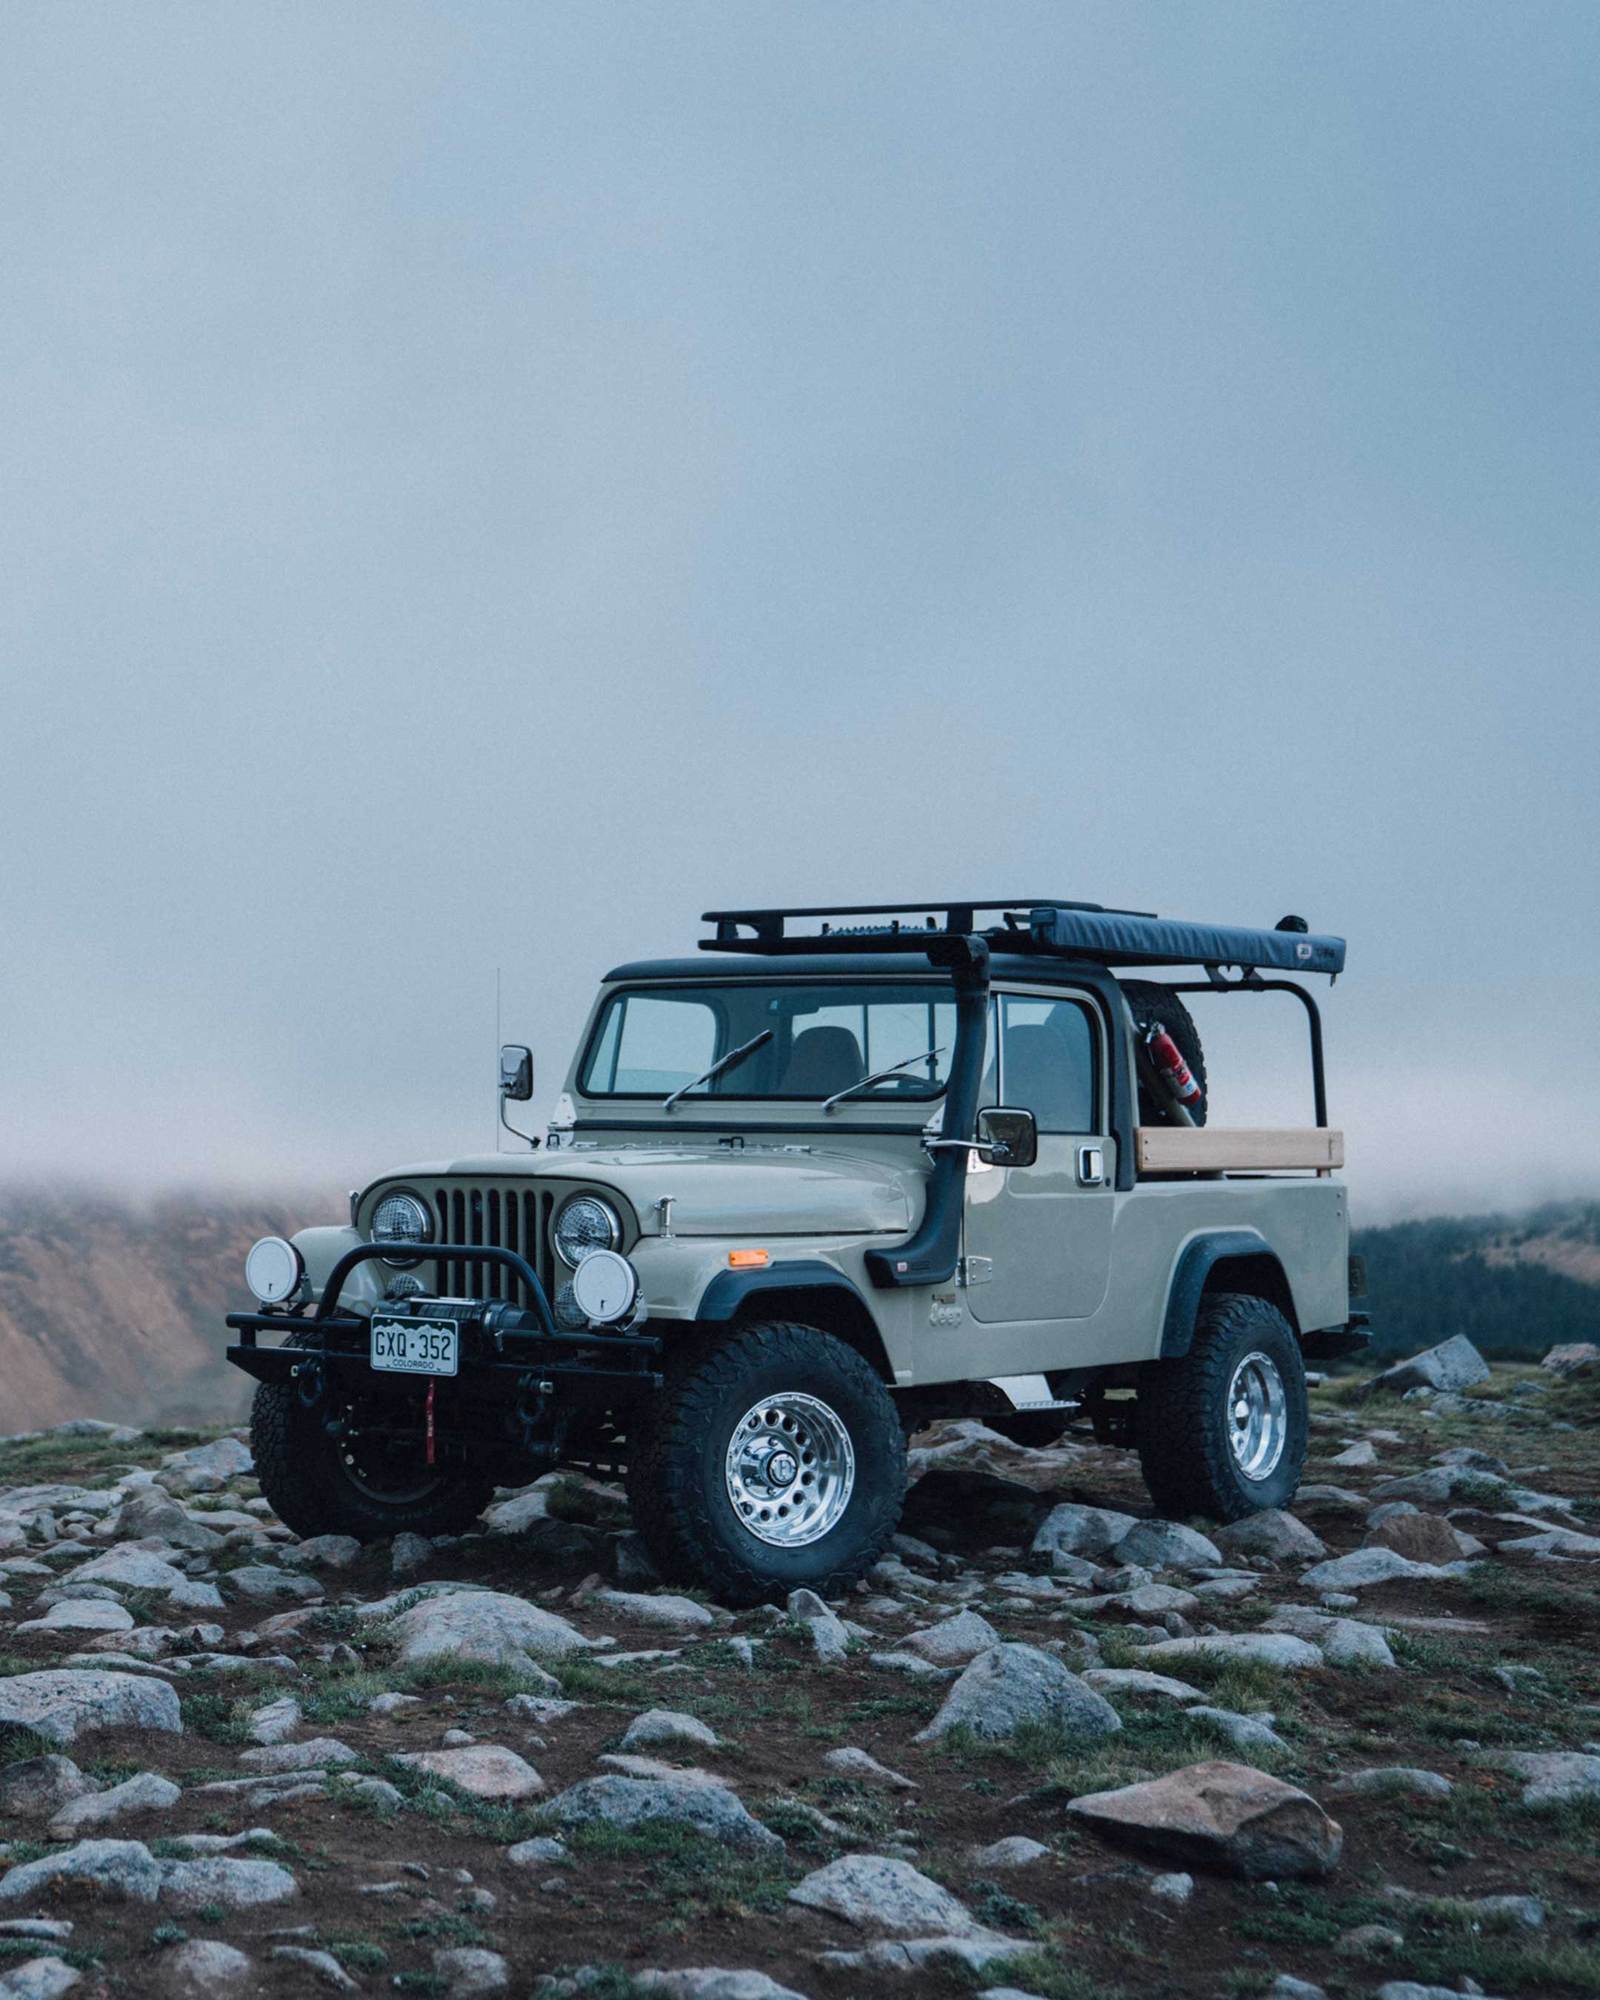 Ball and Buck's vintage Jeep CJ8 Scrambler on top of a mountain in the morning light